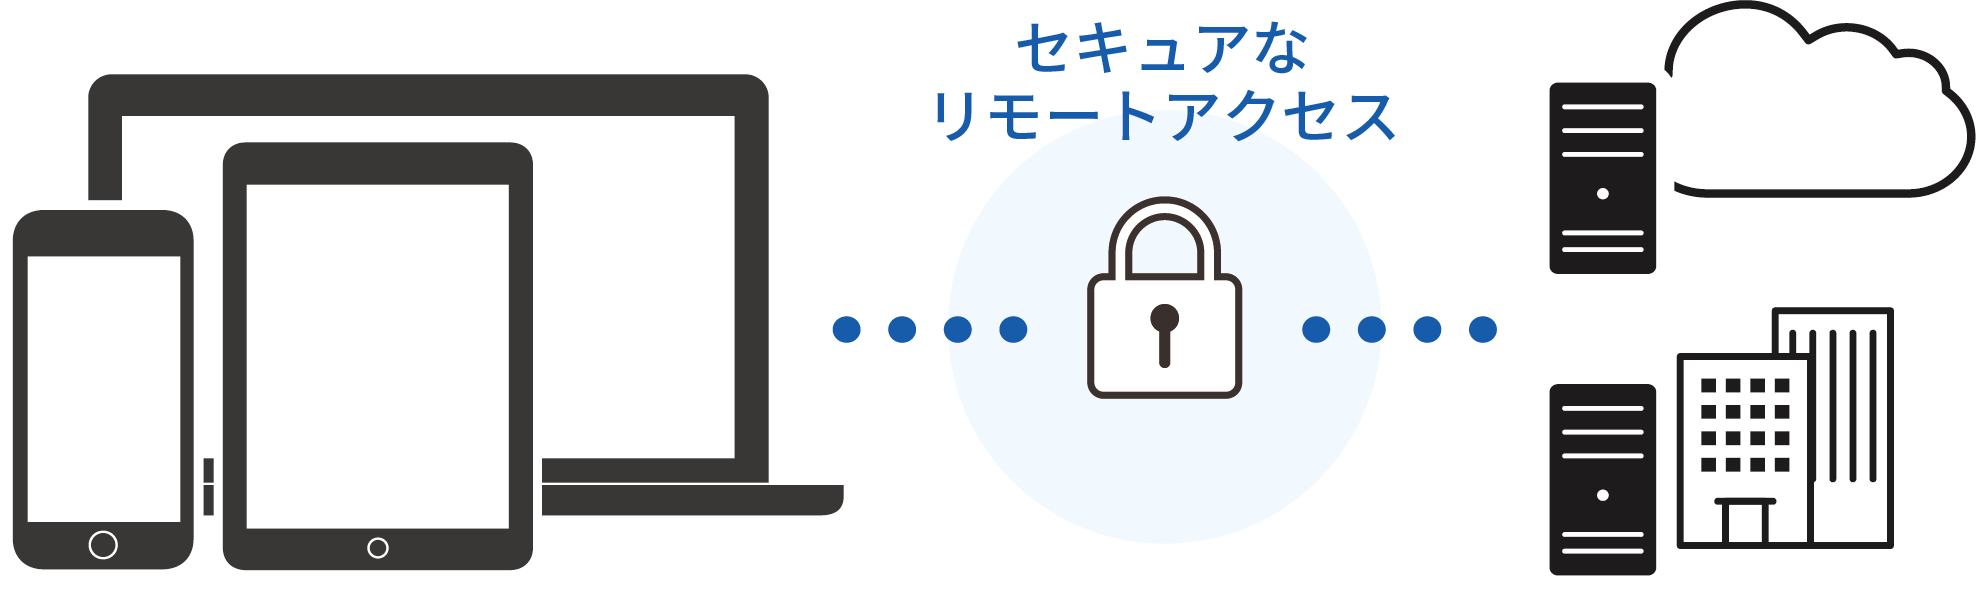 CACHATTO SecureBrowserイメージ